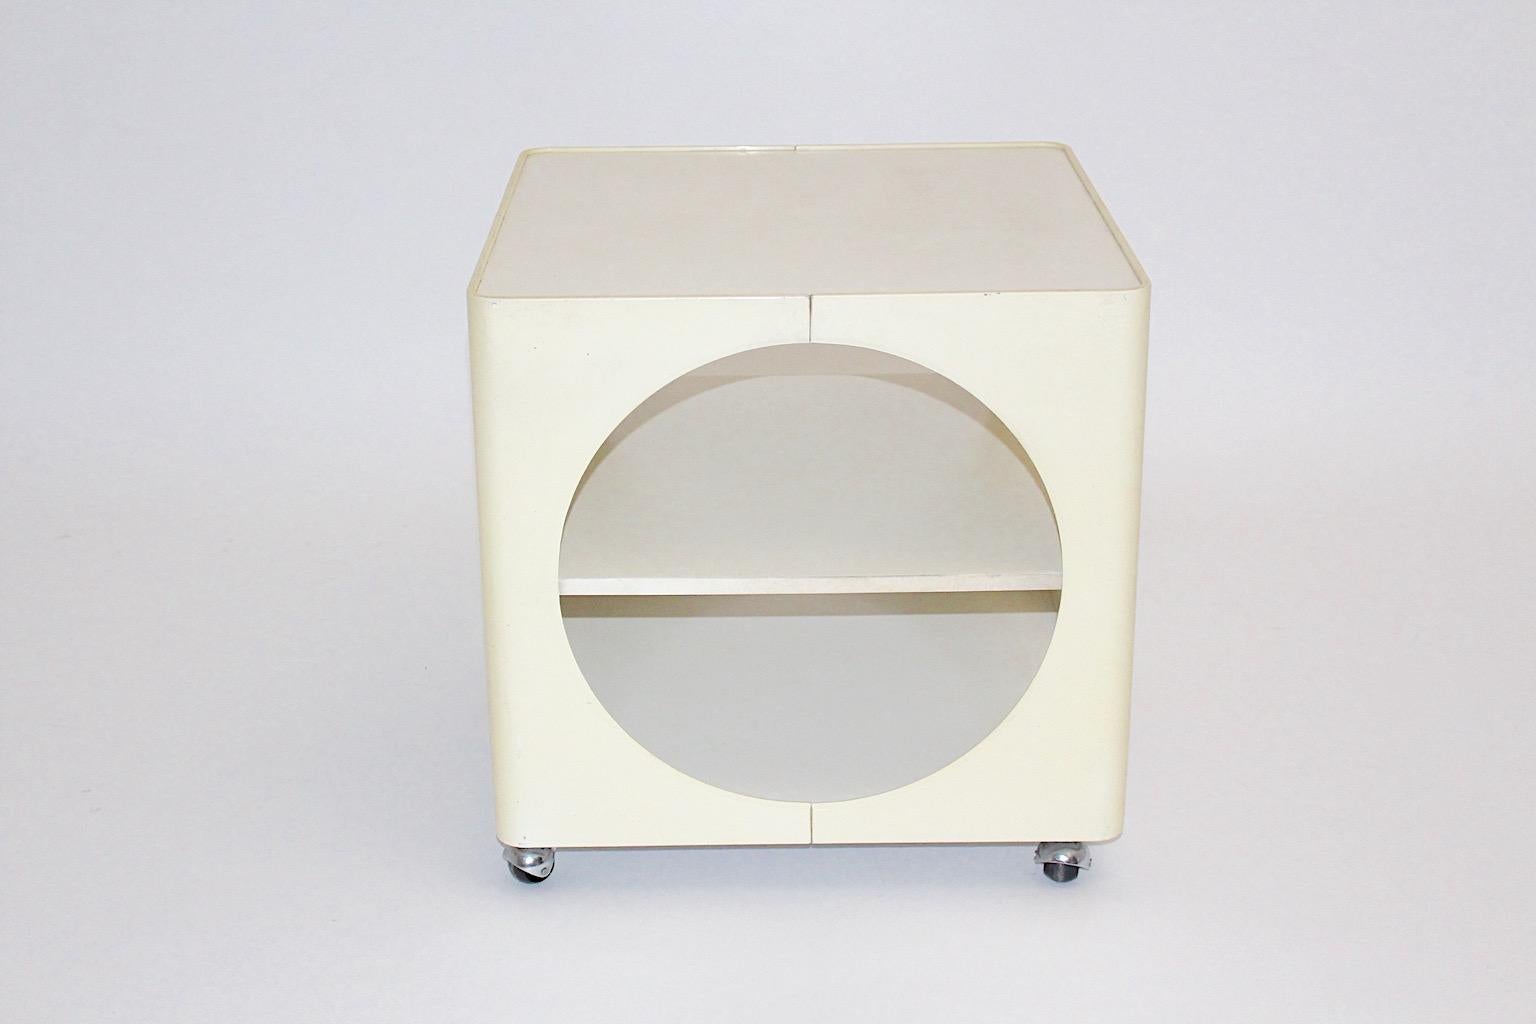 Space Age butter cream white ivory vintage cube bar cart or side table from plastic designed 1960s Germany.
The vintage bar cart or side table shows 4 wheels for good mobility and one shelf.
In the space age time the designer loved to play with